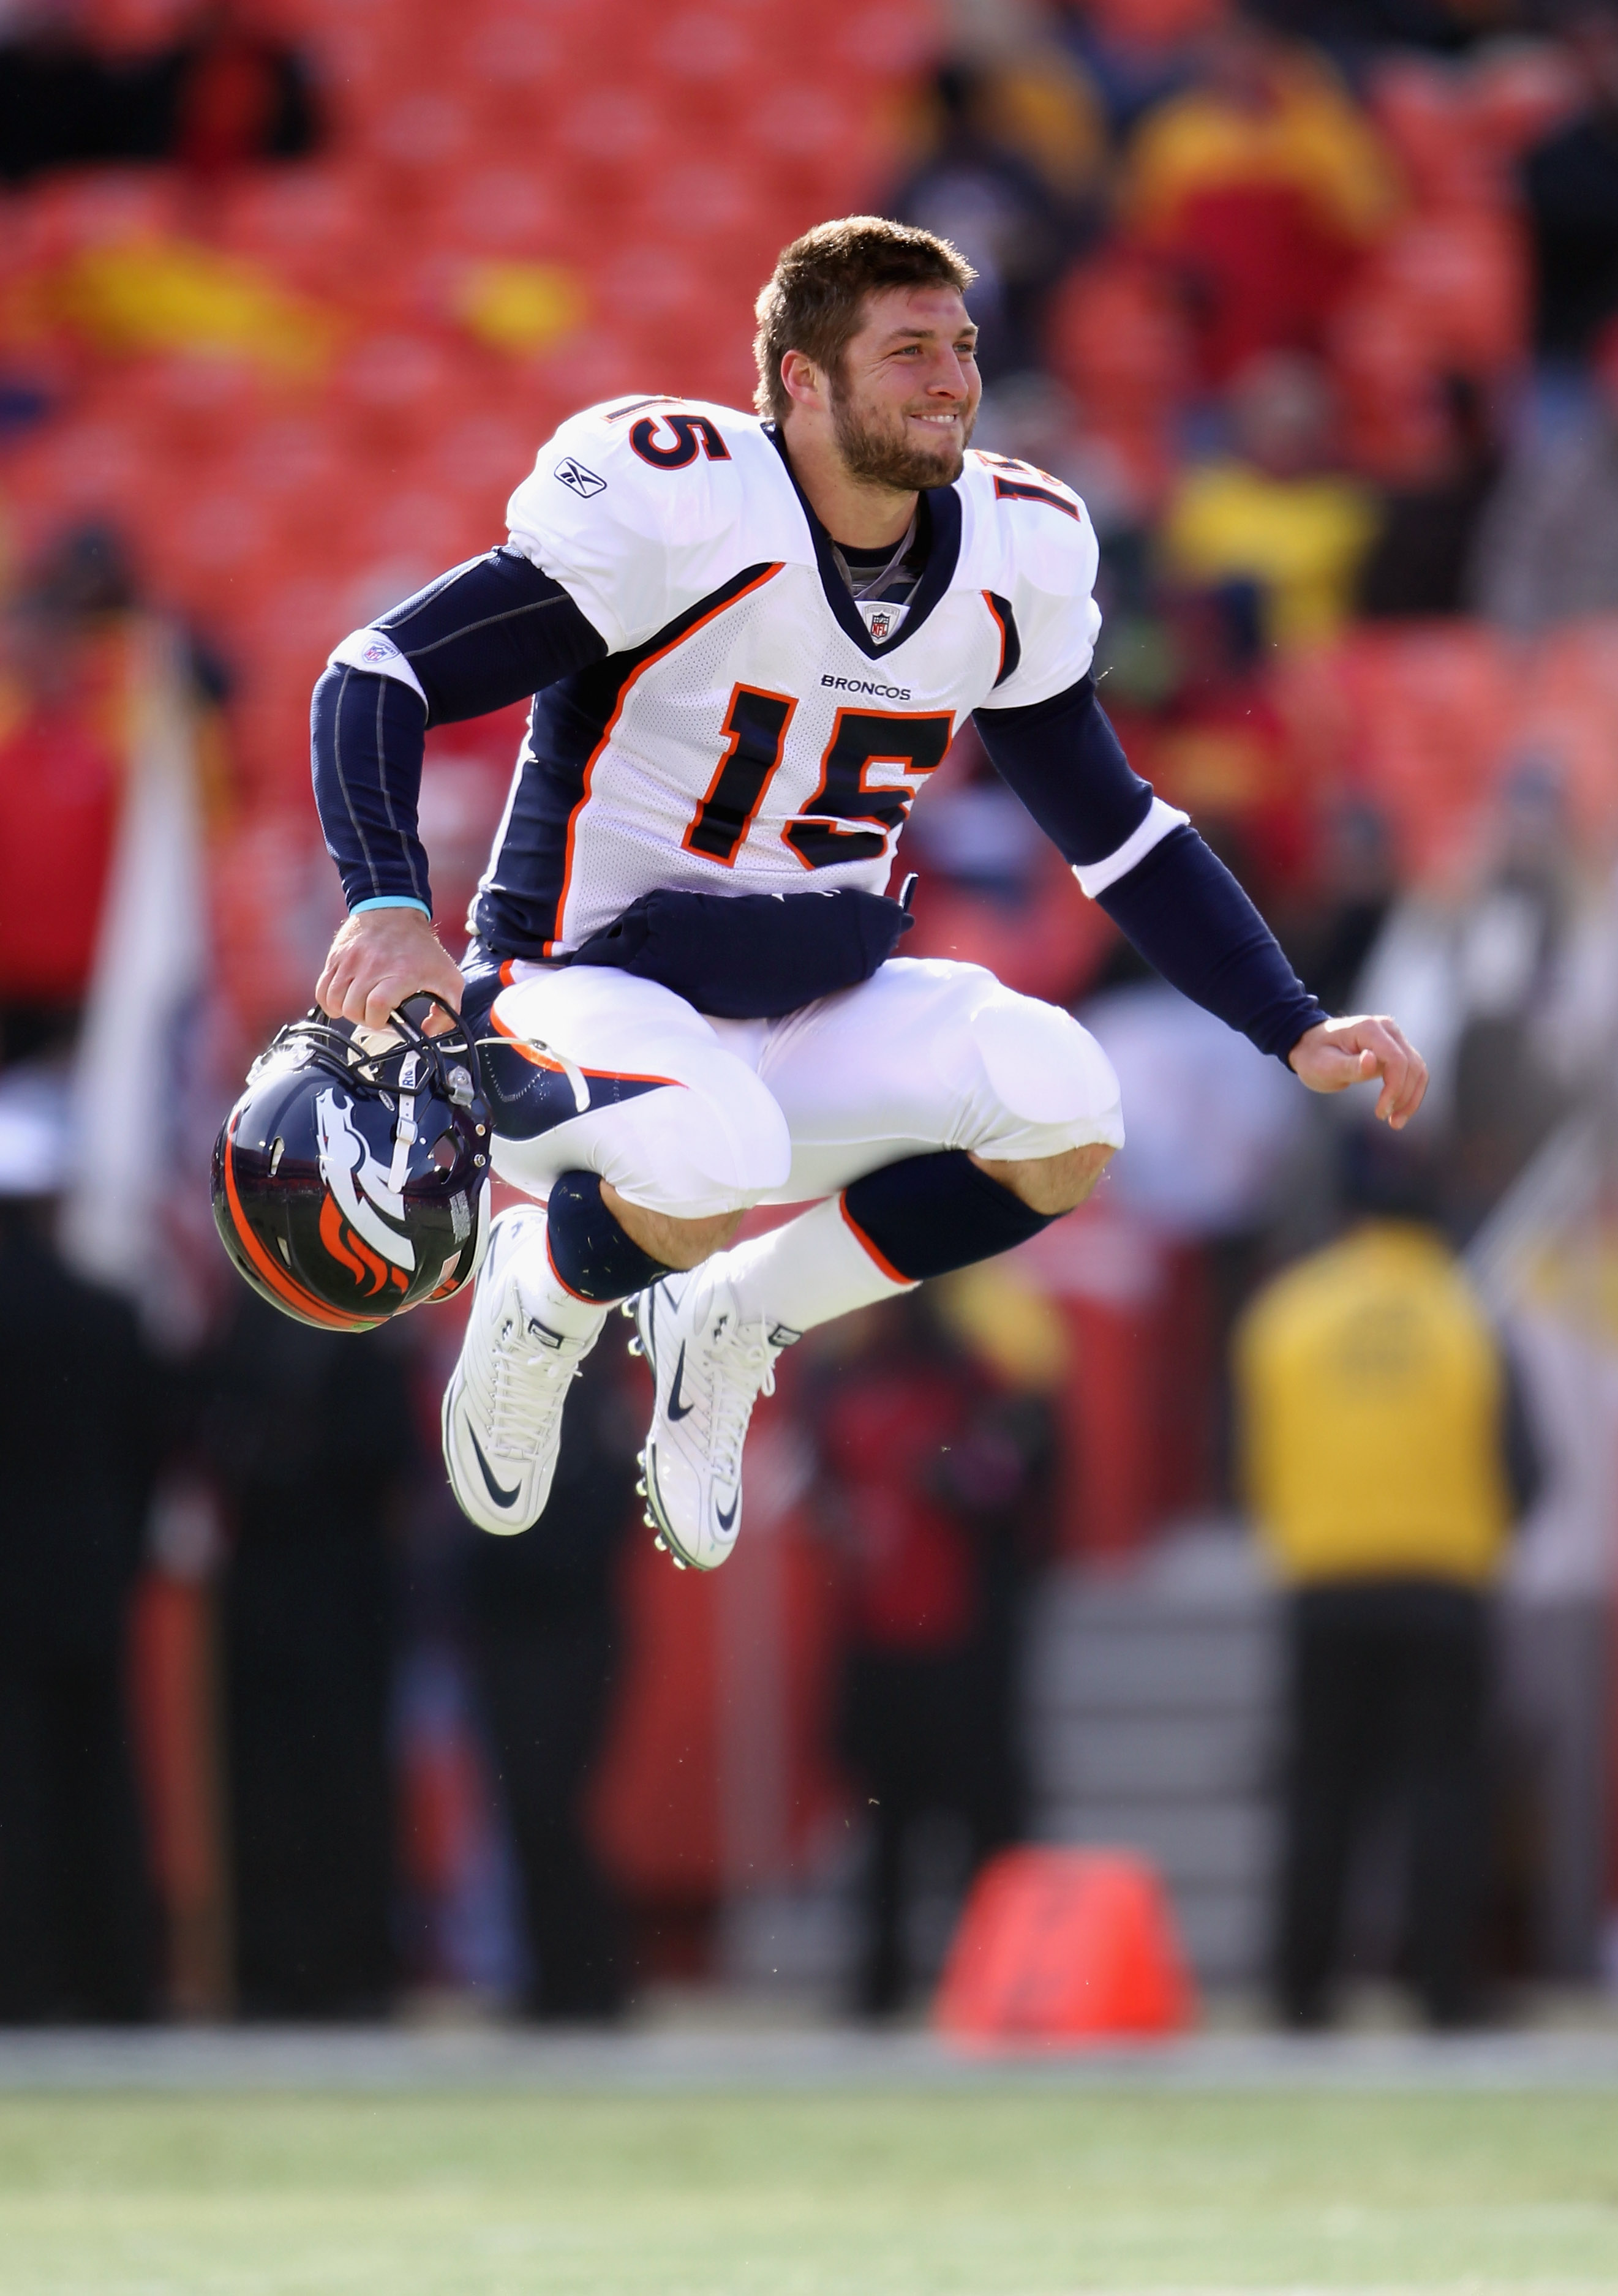 KANSAS CITY, MO - DECEMBER 05:  Quarterback Tim Tebow #15 of the Denver Broncos stretches during warm-ups prior to the start of the game against the Kansas City Chiefs on December 5, 2010 at Arrowhead Stadium in Kansas City, Missouri.  (Photo by Jamie Squ